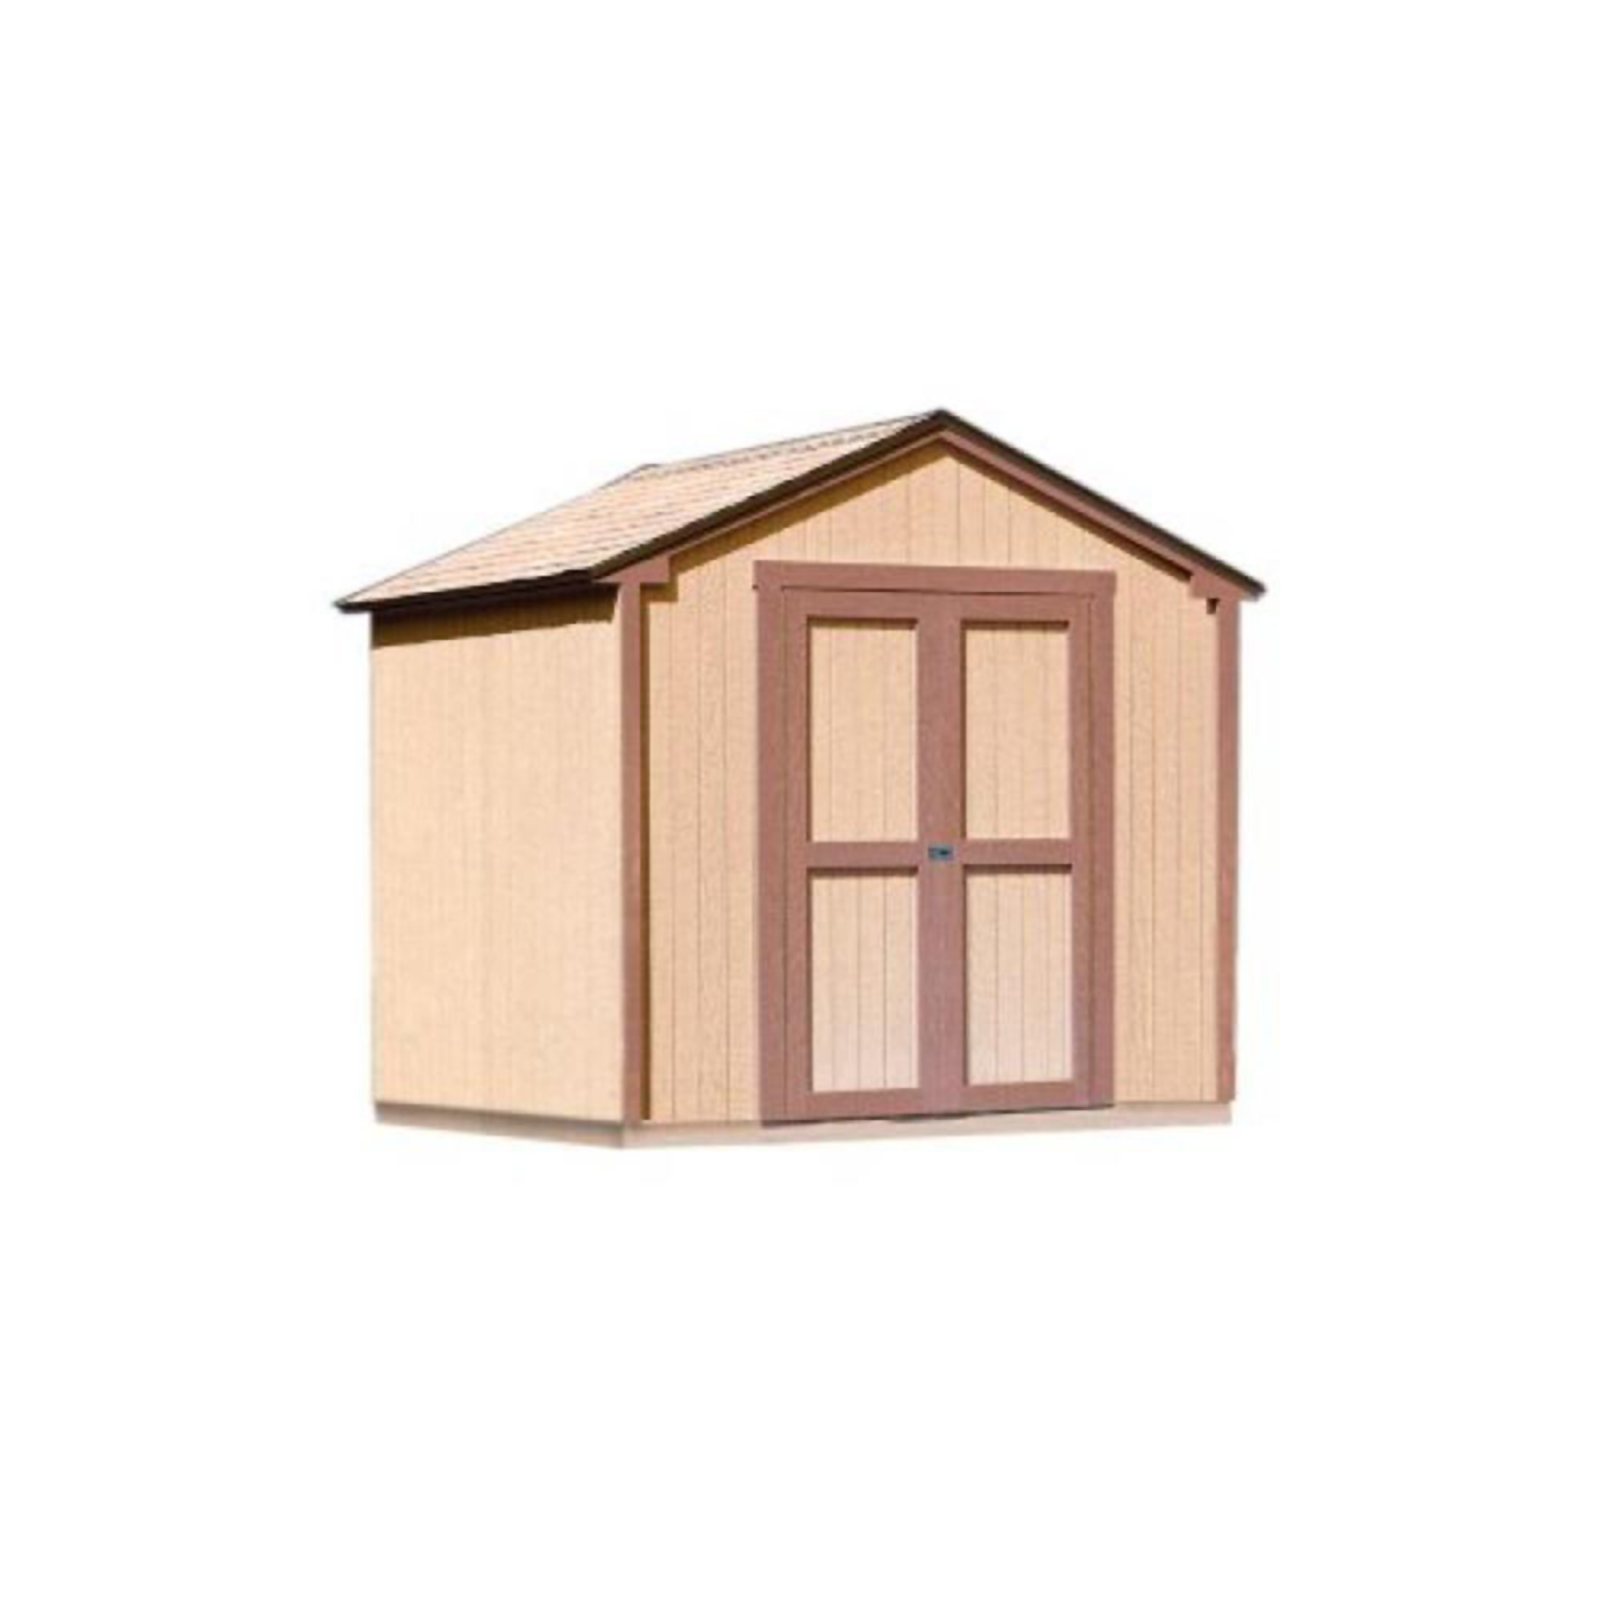 Handy Home Products 18275-4 Kingston 8' x 8' Shed Kit with Floor Kit